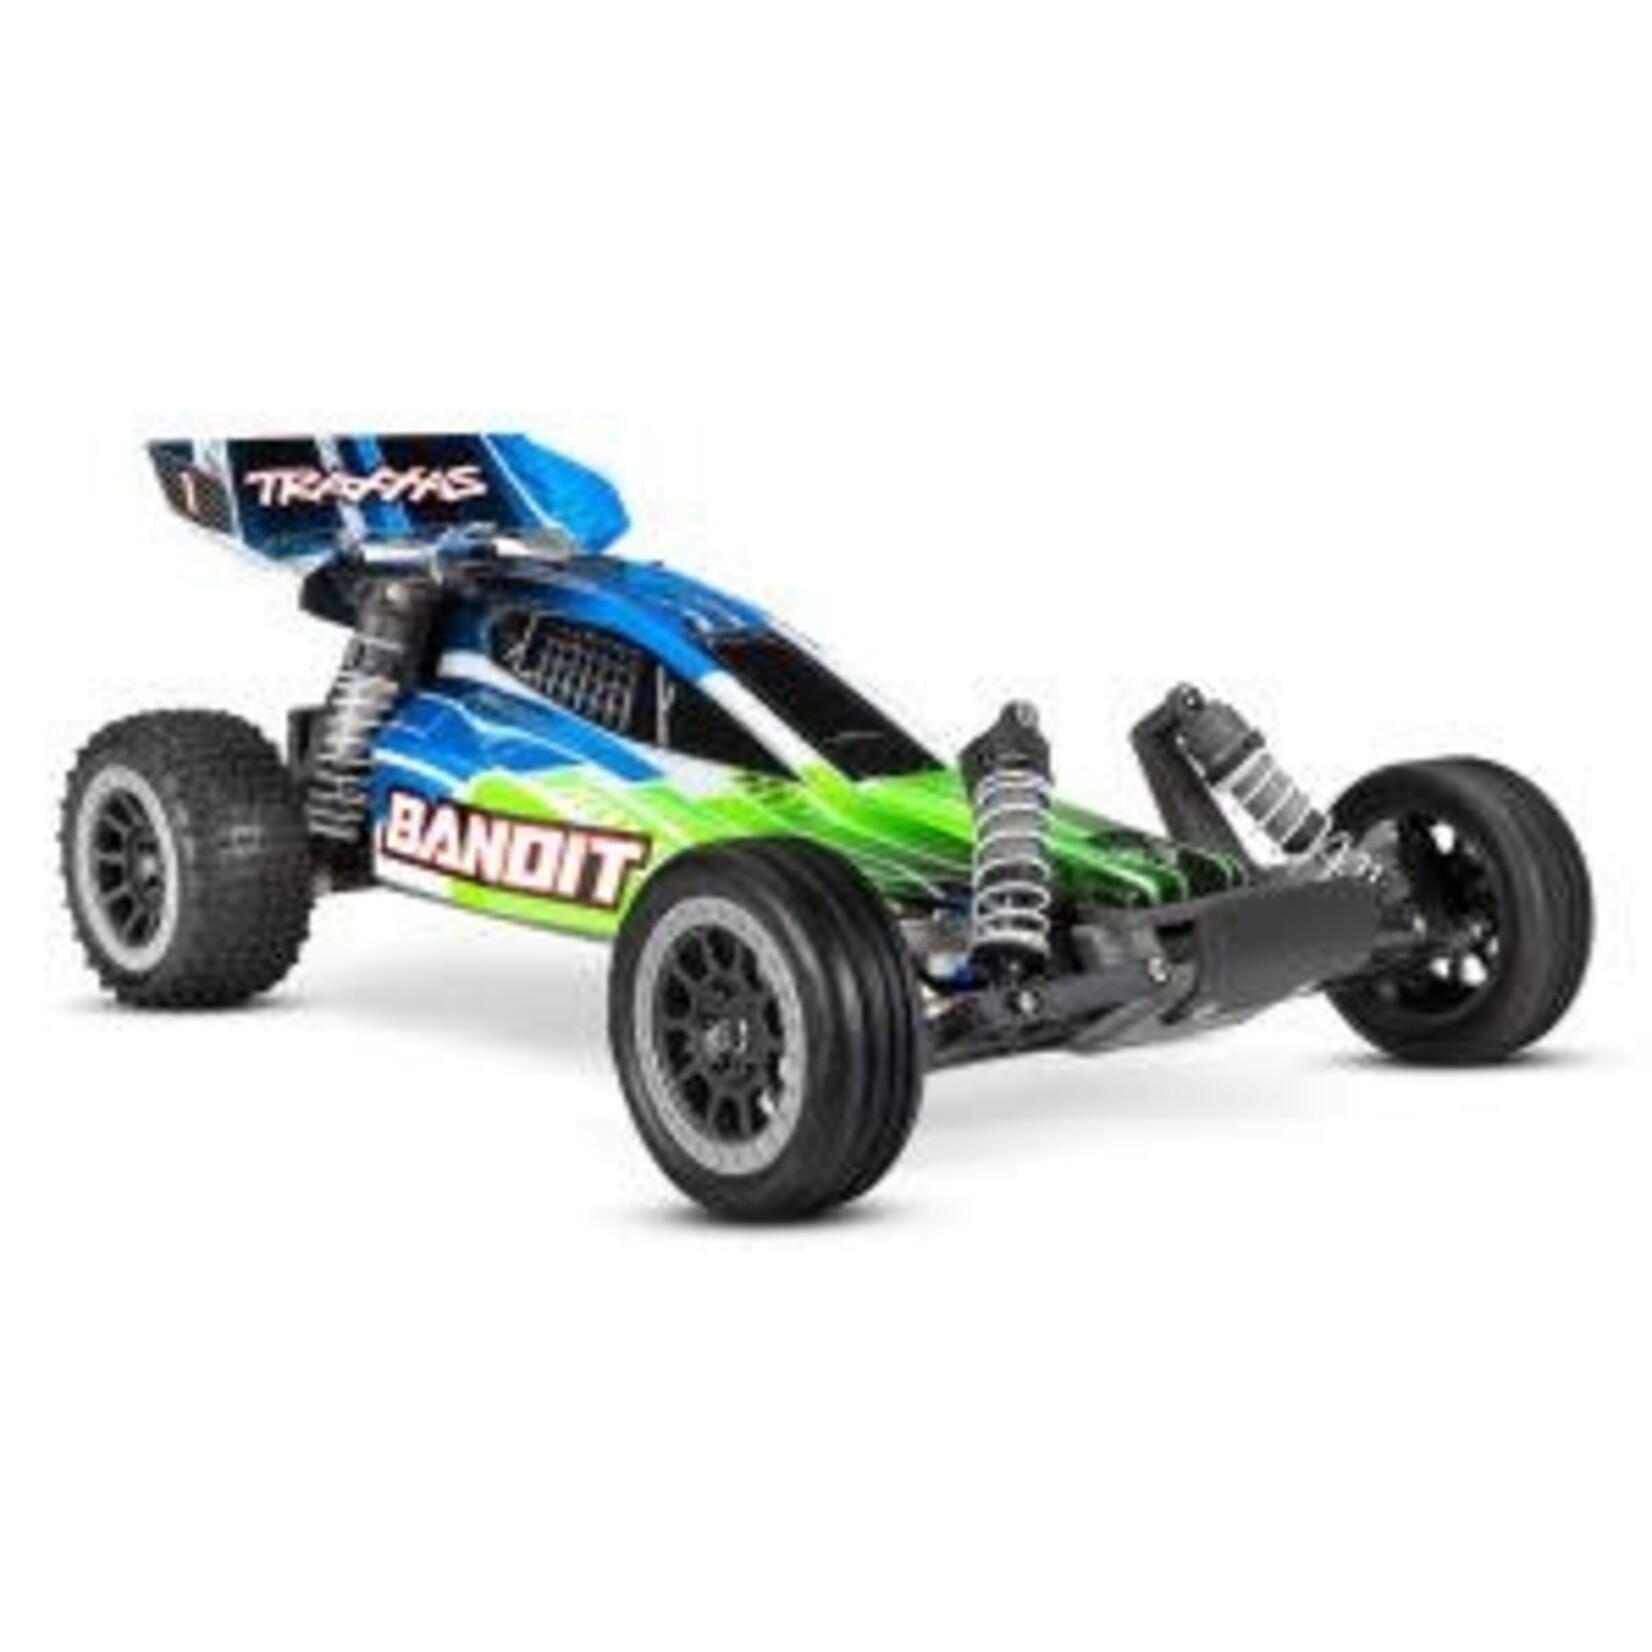 Traxxas 24054-8-GRN  Bandit 1/10 Extreme Sports Buggy